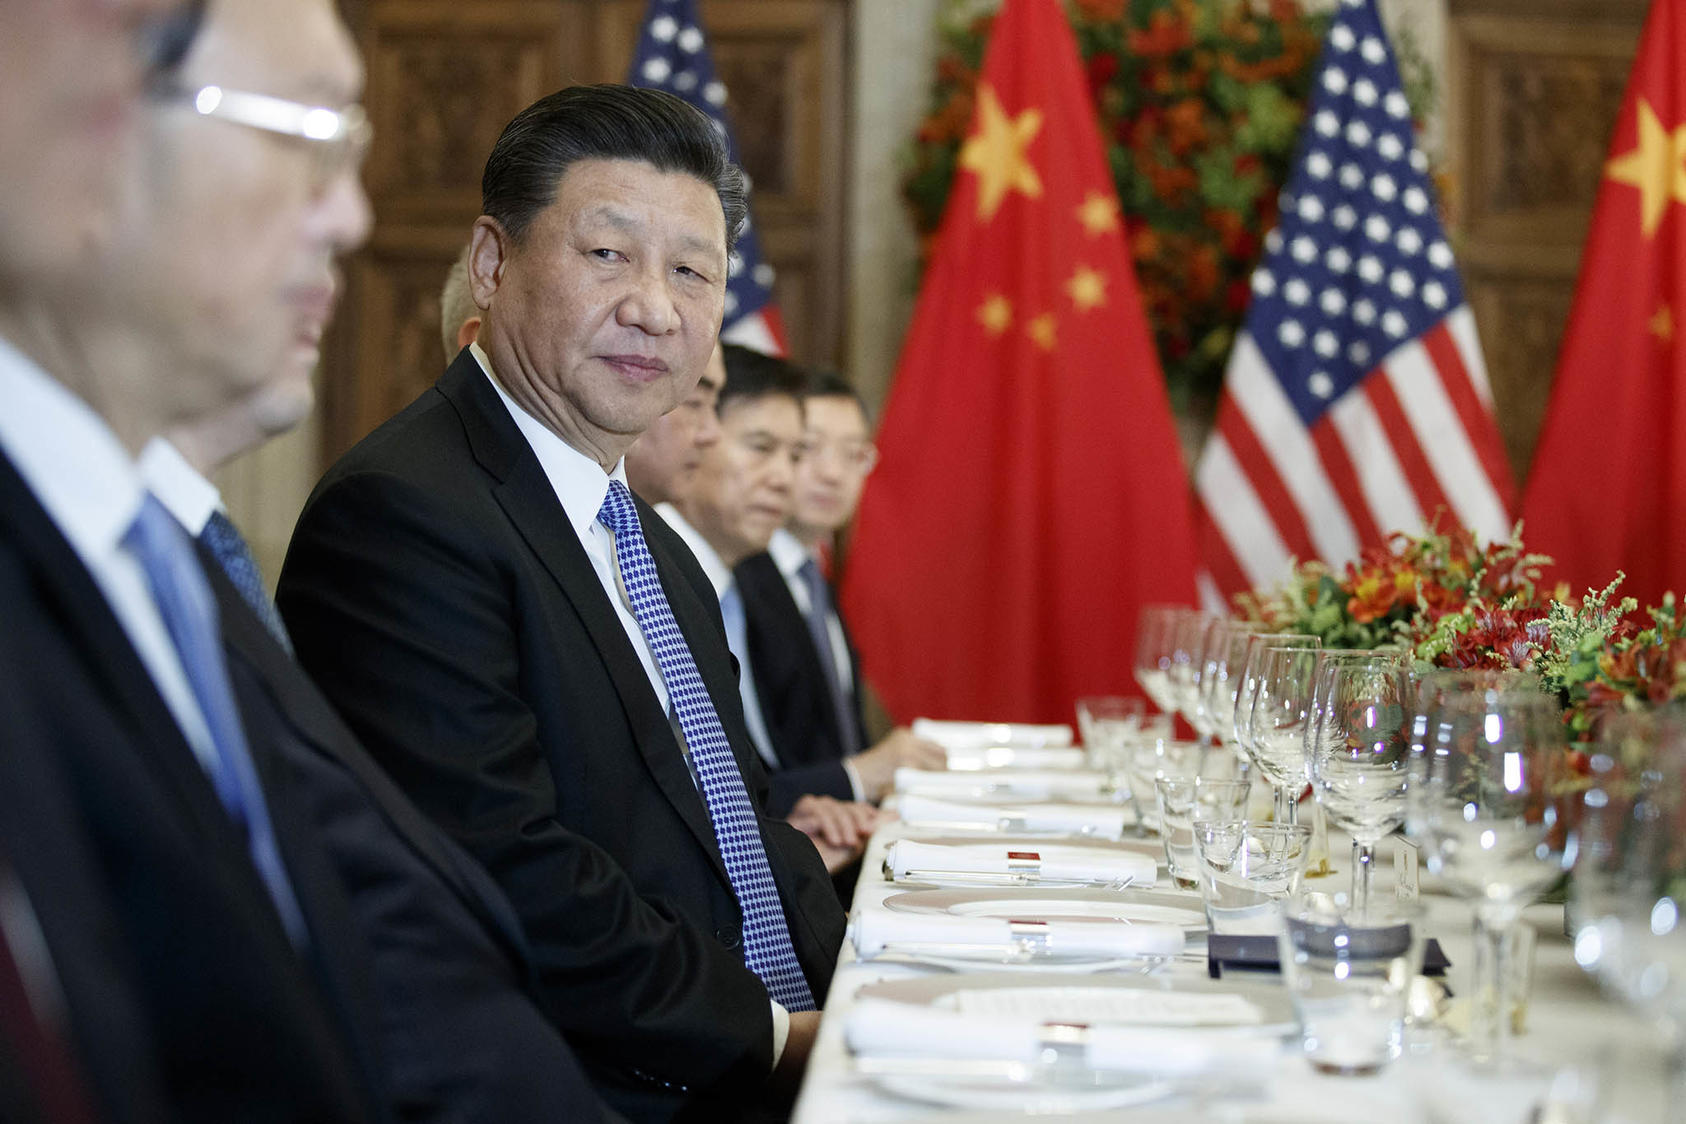 President Xi Jinping of China participates in a bilateral dinner meeting with President Donald Trump during the G-20 Summit in Buenos Aires, Argentina, Dec. 1, 2018. (Tom Brenner/The New York Times)